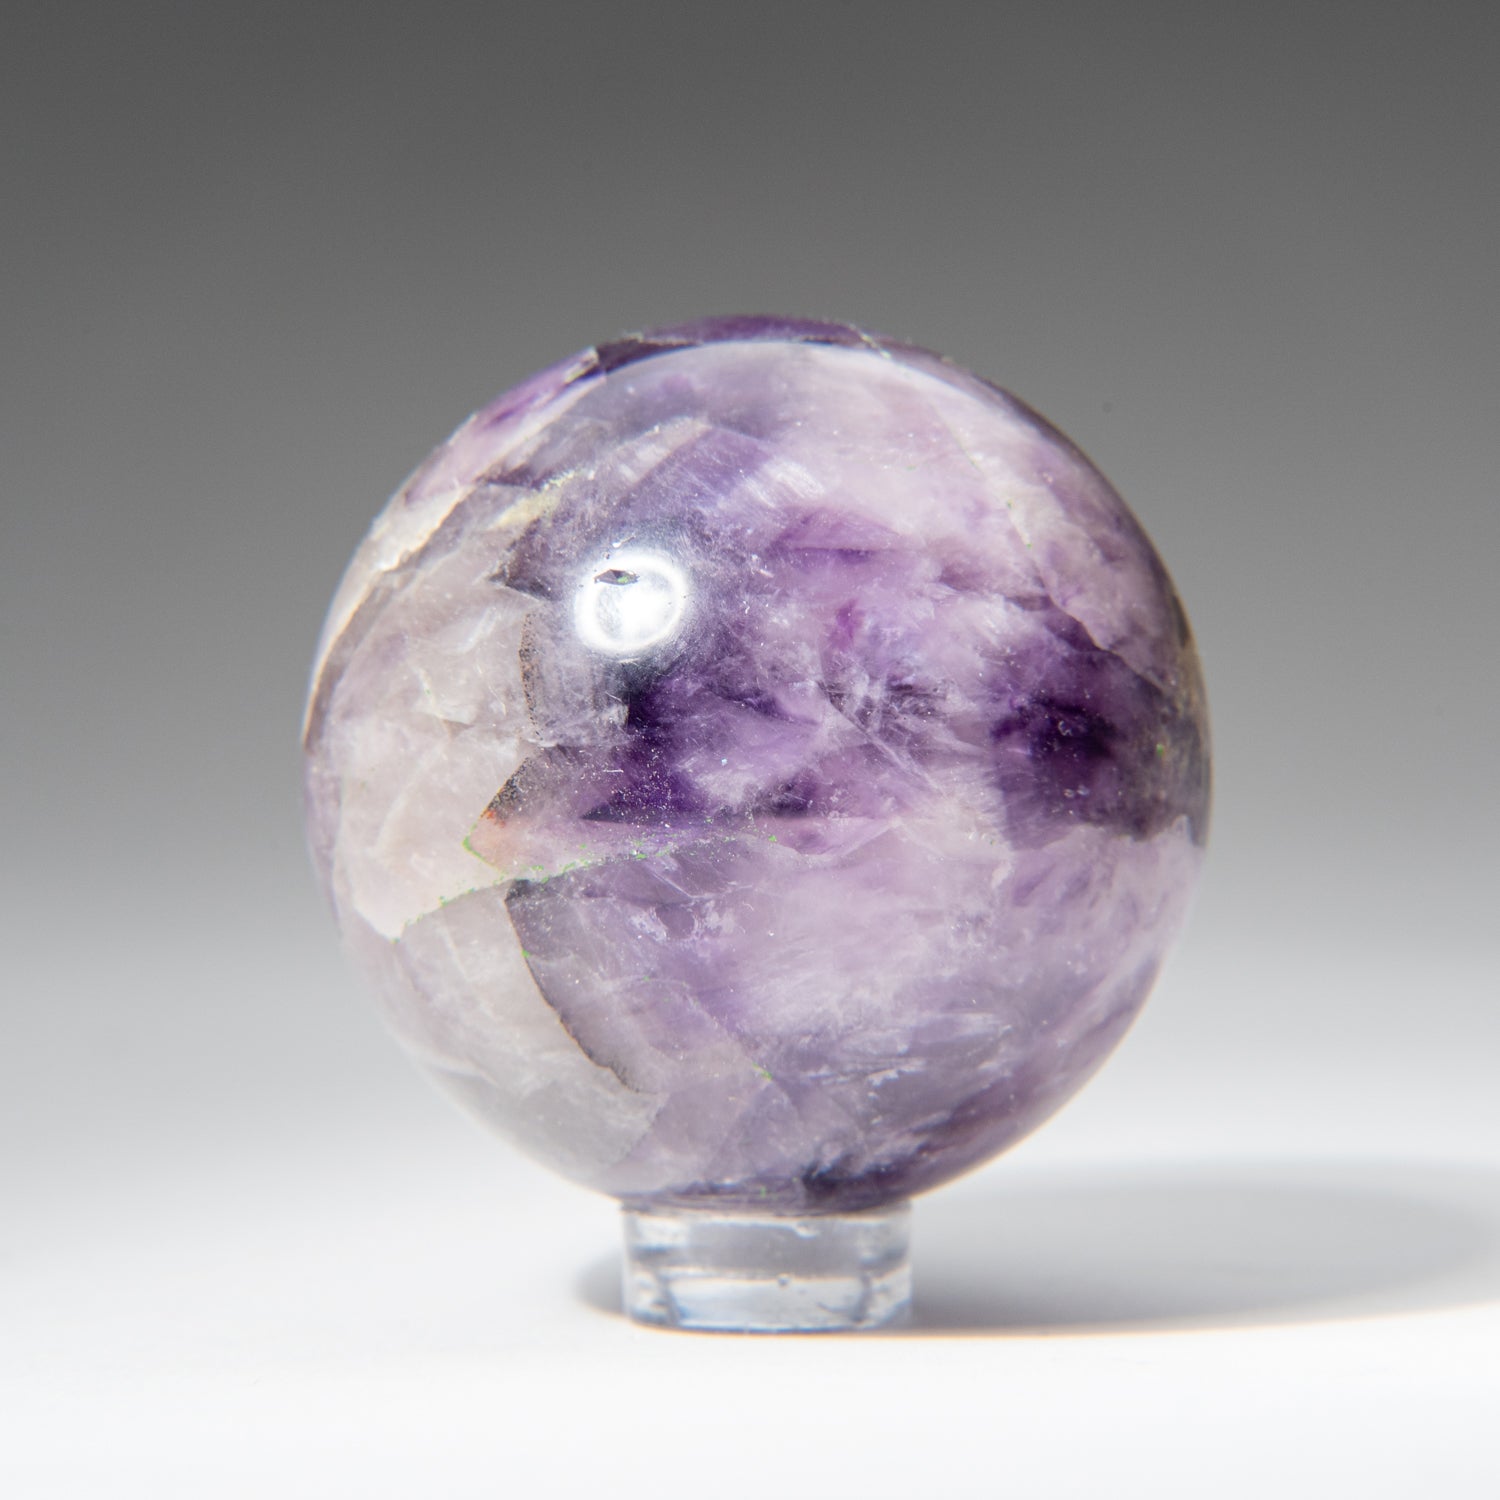 Genuine Polished Amethyst Sphere (2") with Acrylic Display Stand